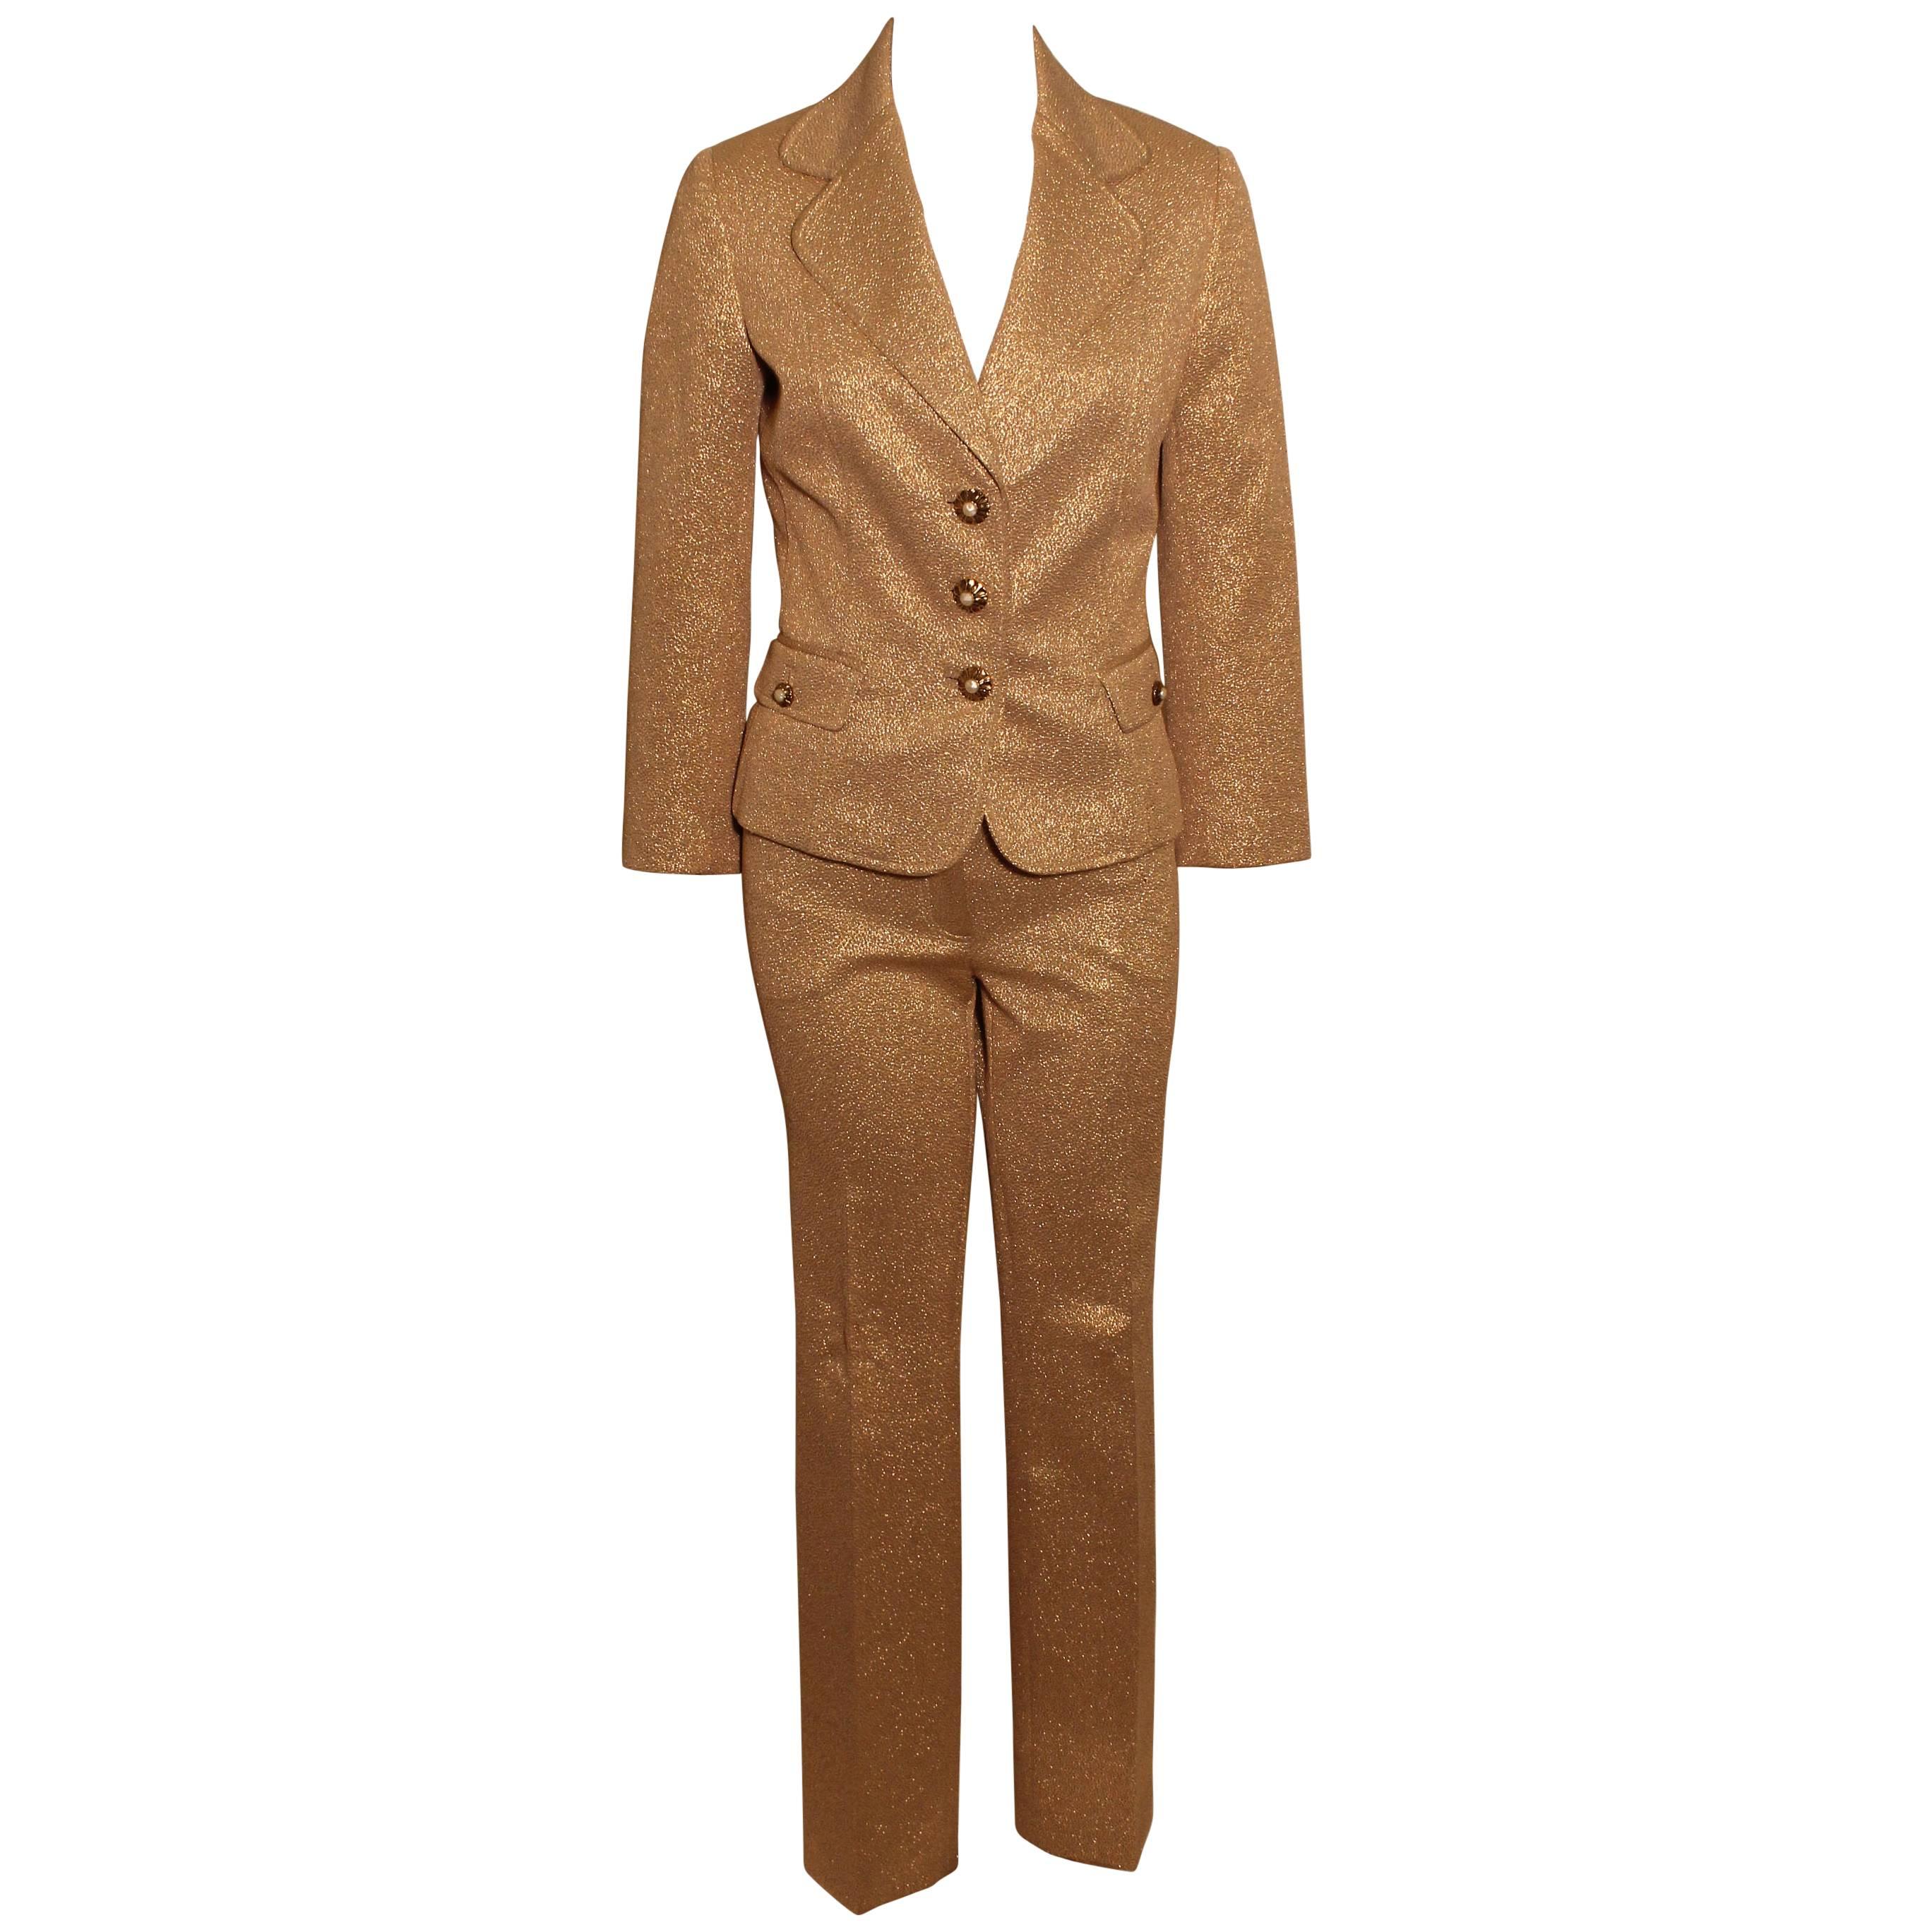 Dolce & Gabbana Metallic Gold Pant Suit For Sale